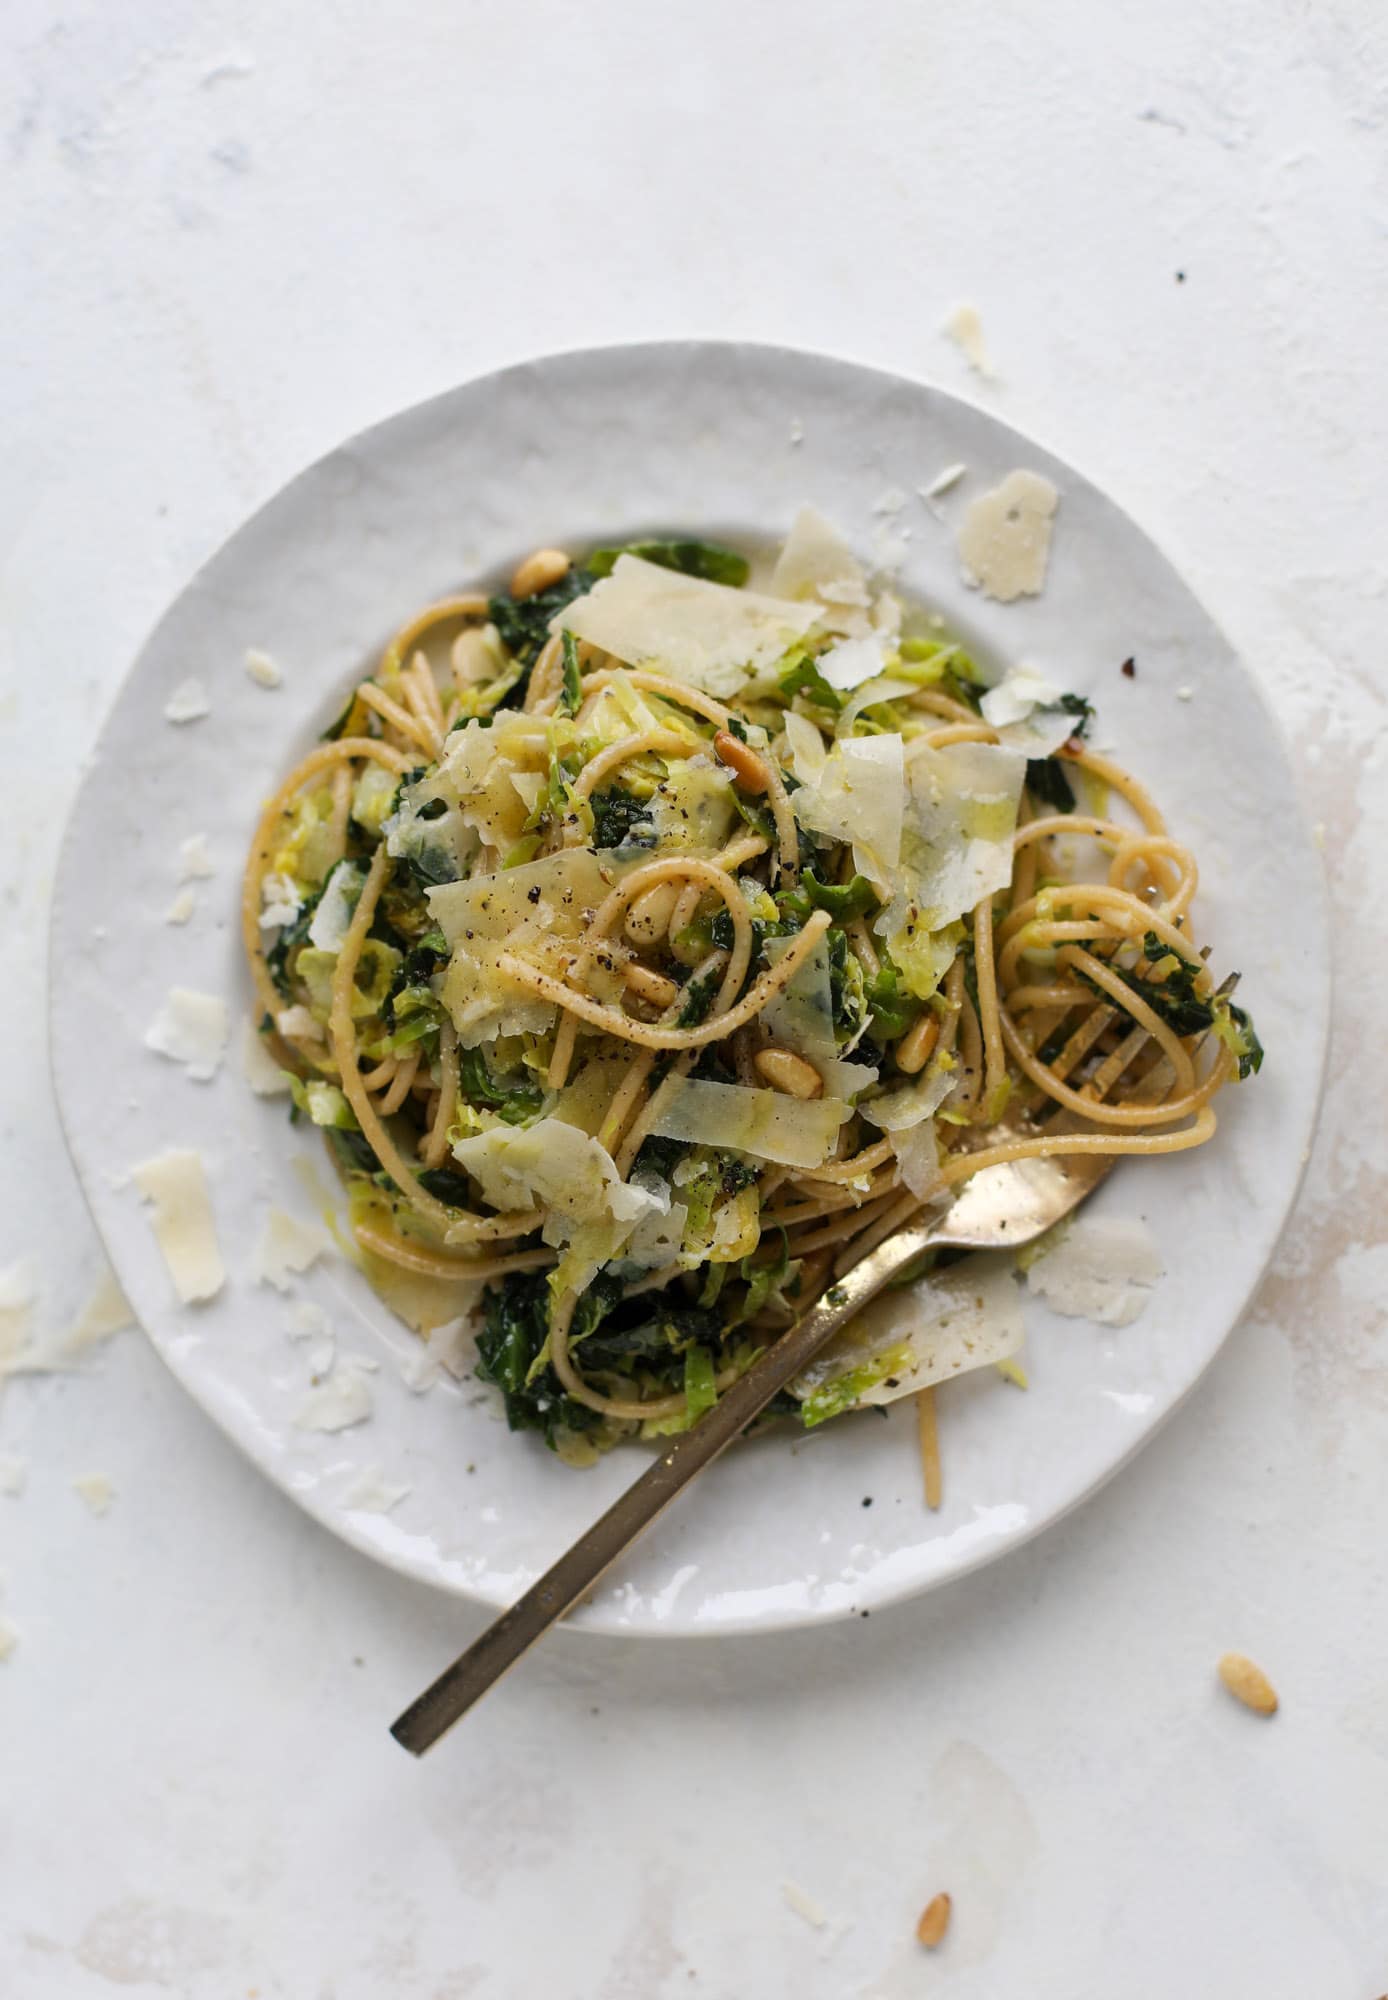 This brussels spaghetti with kale, parmesan and pine nuts is a super flavorful, quick and easy weeknight meal. You can add in a protein if you wish! I howsweeteats.com #brussels #spaghetti